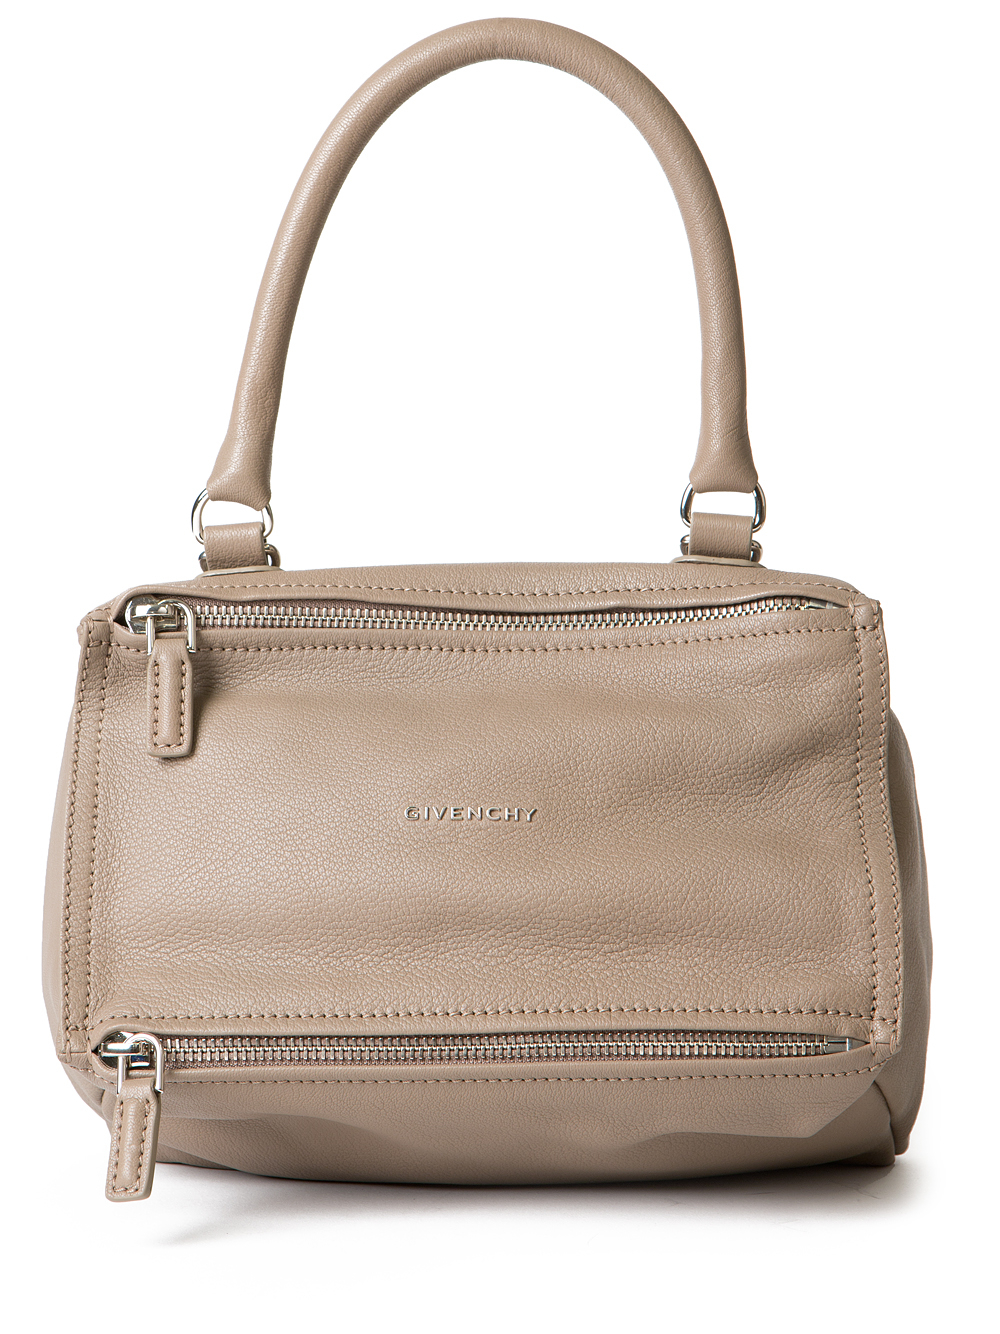 Lyst - Givenchy Small Pandora Bag in Gray